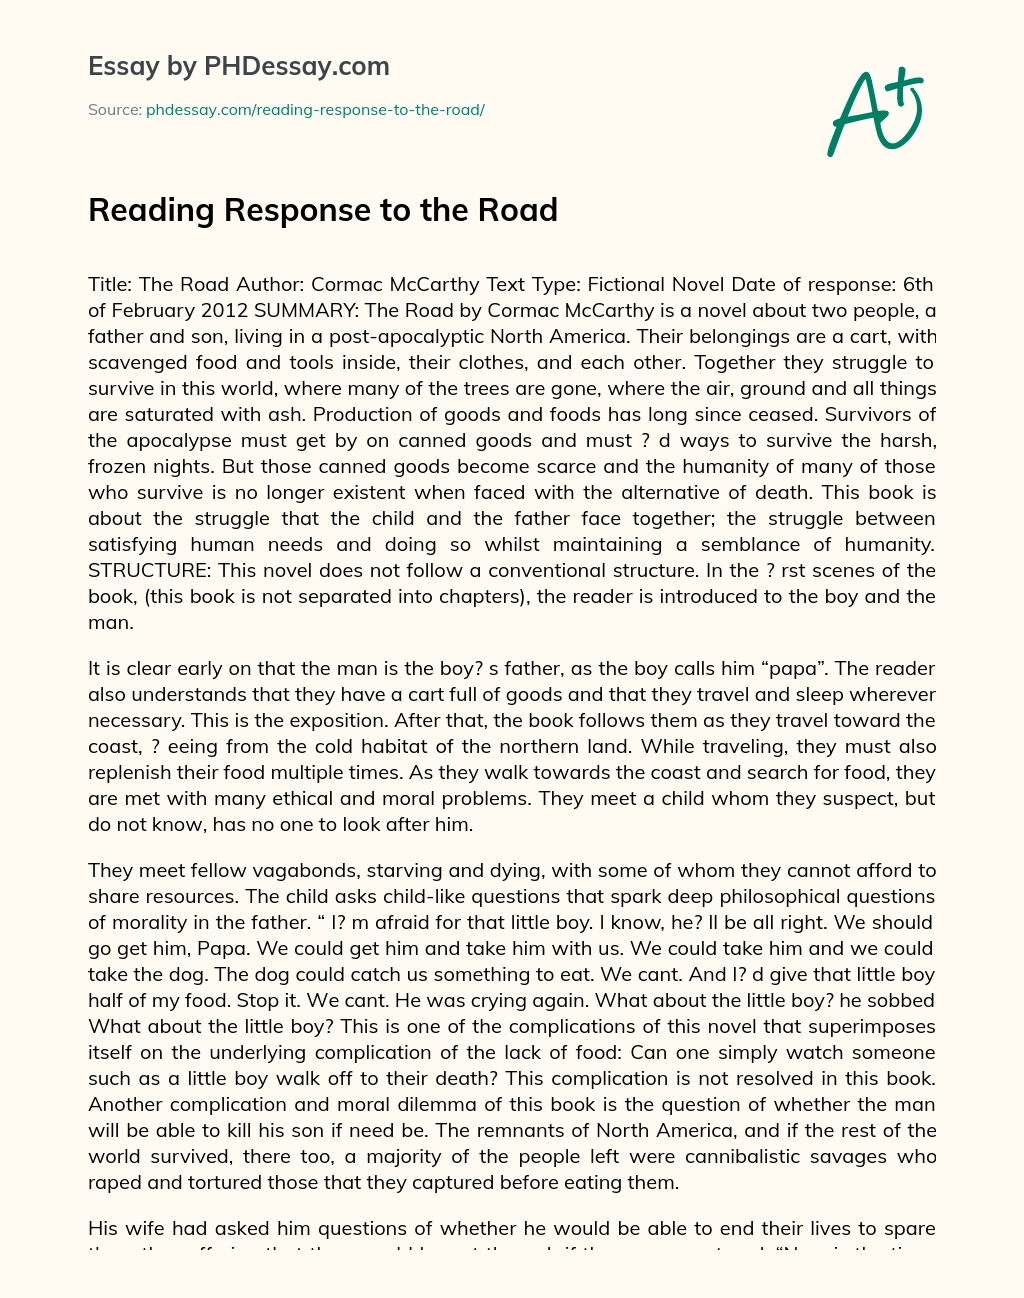 Reading Response to the Road essay